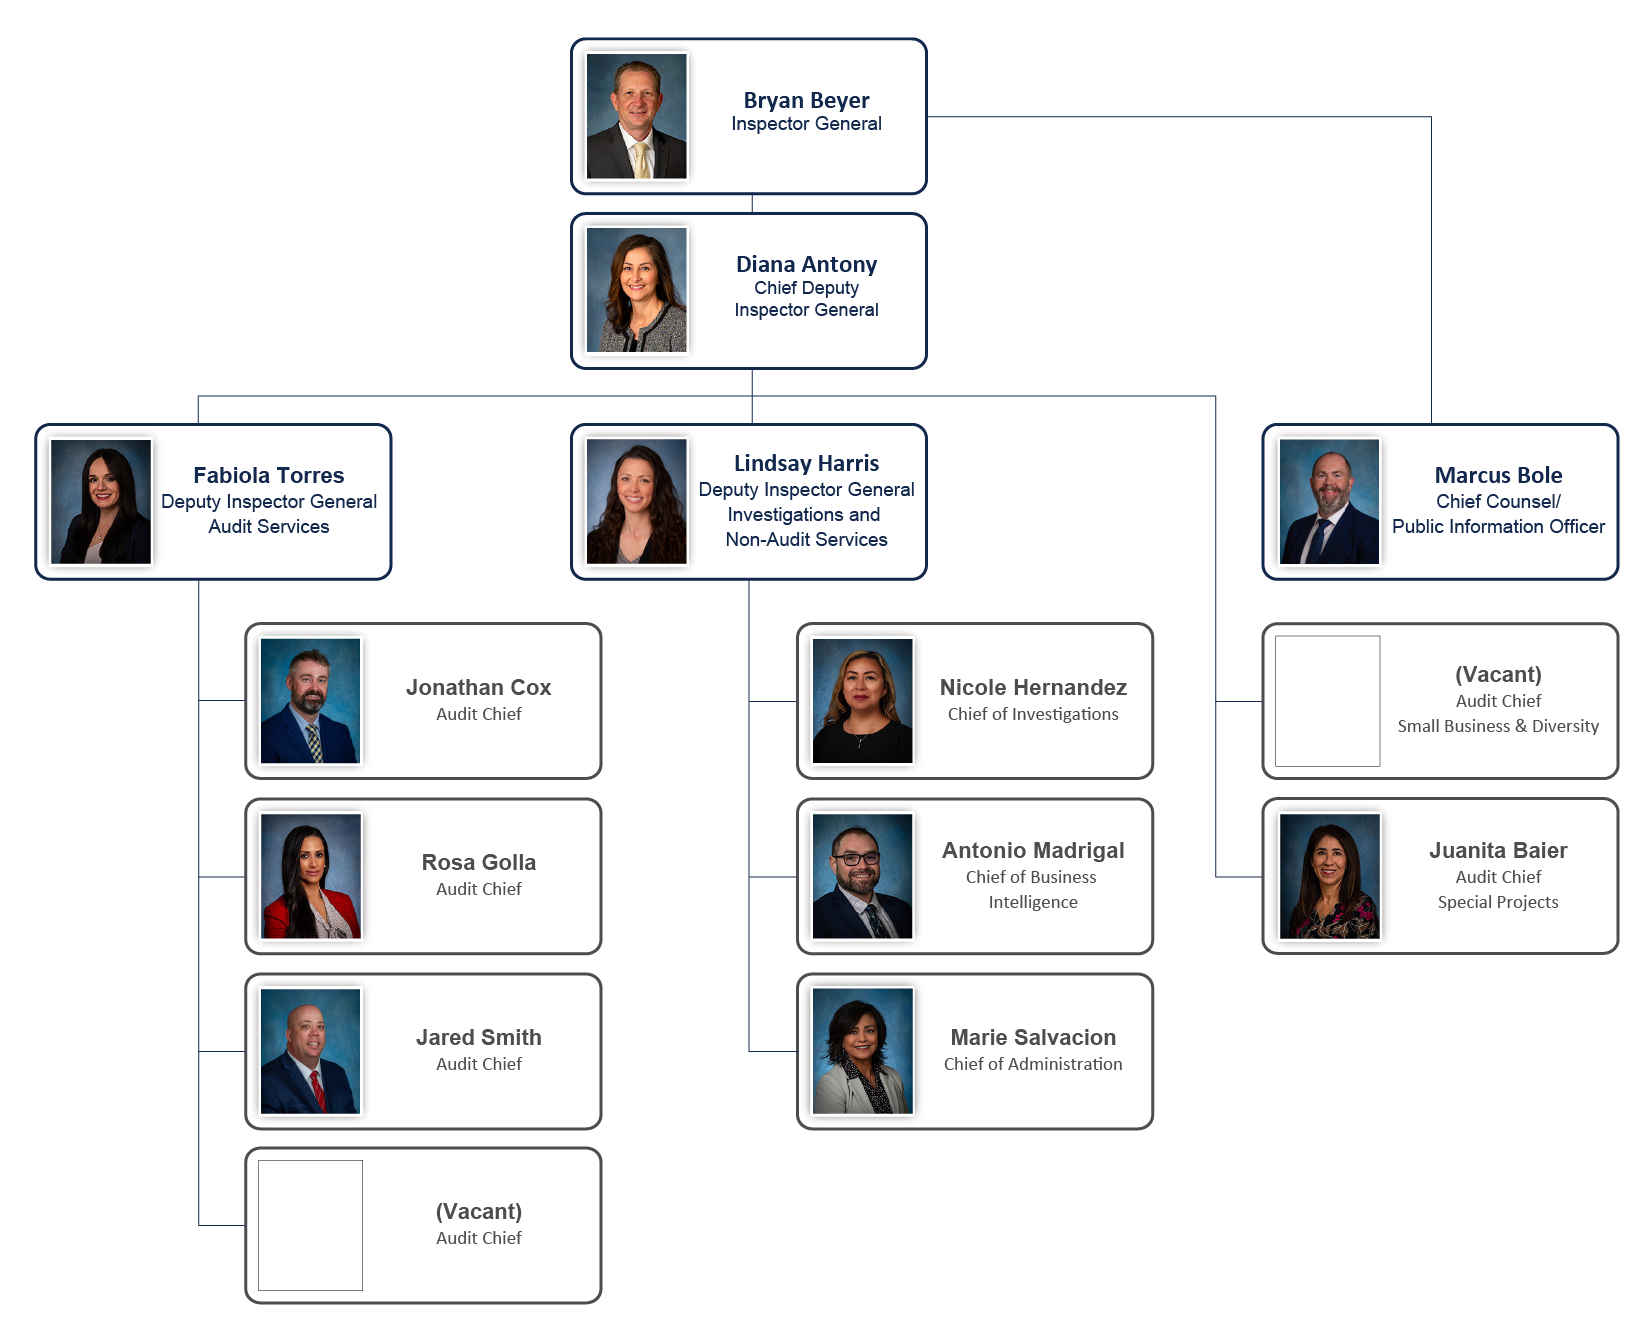 This is the Organization Chart for the IOAI. Bryan Beyer, Inspector General, Diana Antony, Chief Deputy Inspector General, Frances Parmelee, Deputy Inspector General - Audit Services, Lindsay Harris, Deputy Inspector General - Investigations and Non-Audit Services, Marcus Bole, Chief Counsel/Public Information Officer, Jonathan Cox, Audit Chief, Rosa Golla, Audit Chief, Jared Smith, Audit Chief, David Wong, Audit Chief, Nicole Hernandez, Chief of Investigations, Antonio Madrigal, Chief of Business Intelligence, Marie Salvacion, Chief of Administration, Fabiola Torres, Audit Chief - Small Business and Diversity, Juanita Baier, Special Projects.  